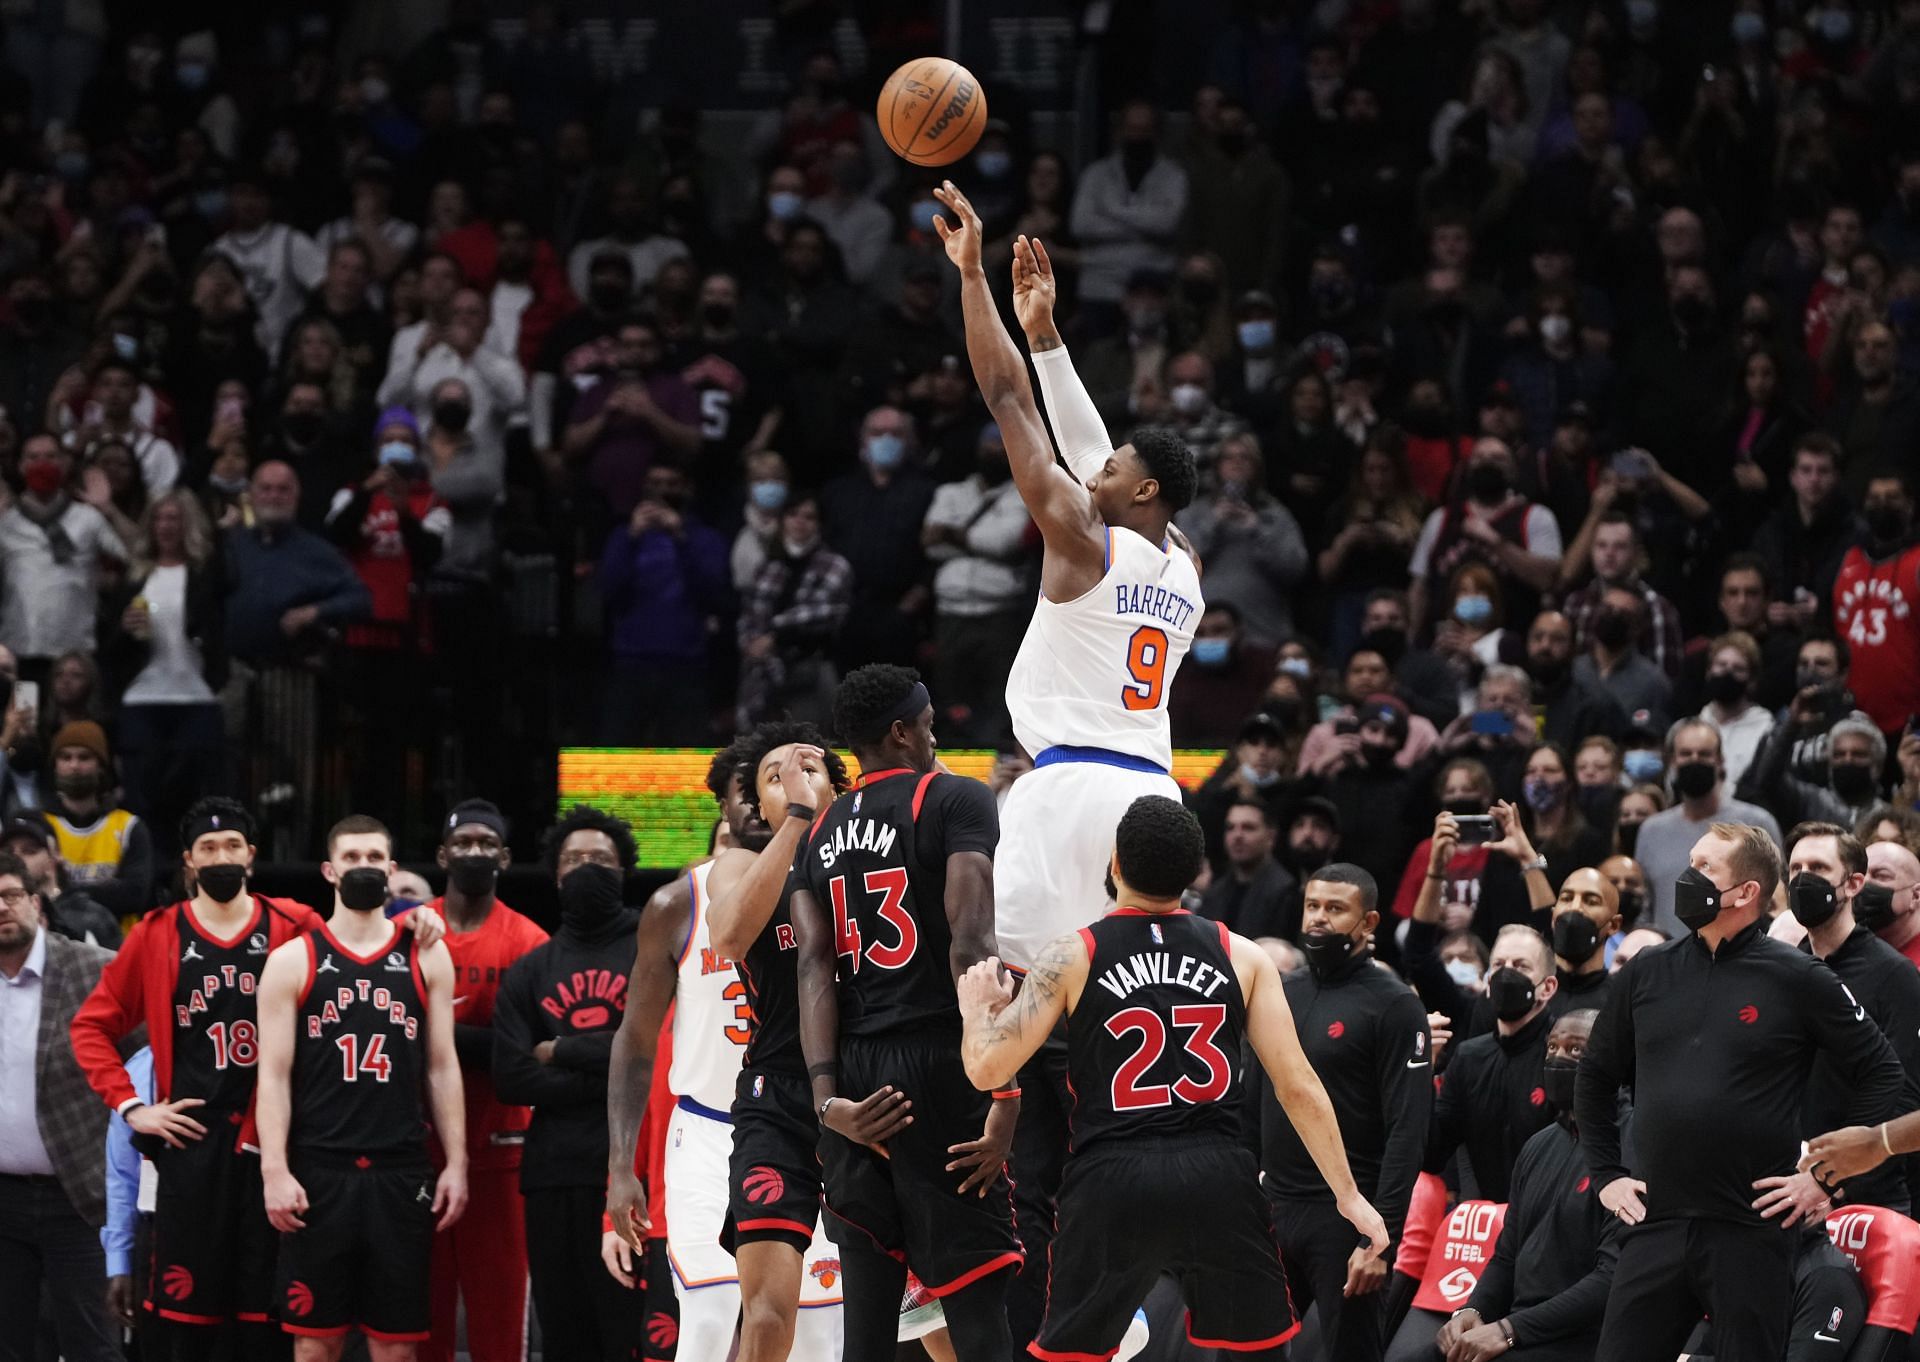 New York Knicks v Toronto Raptors; RJ Barrett pulls up for a 3-pointer in the final seconds of the game.